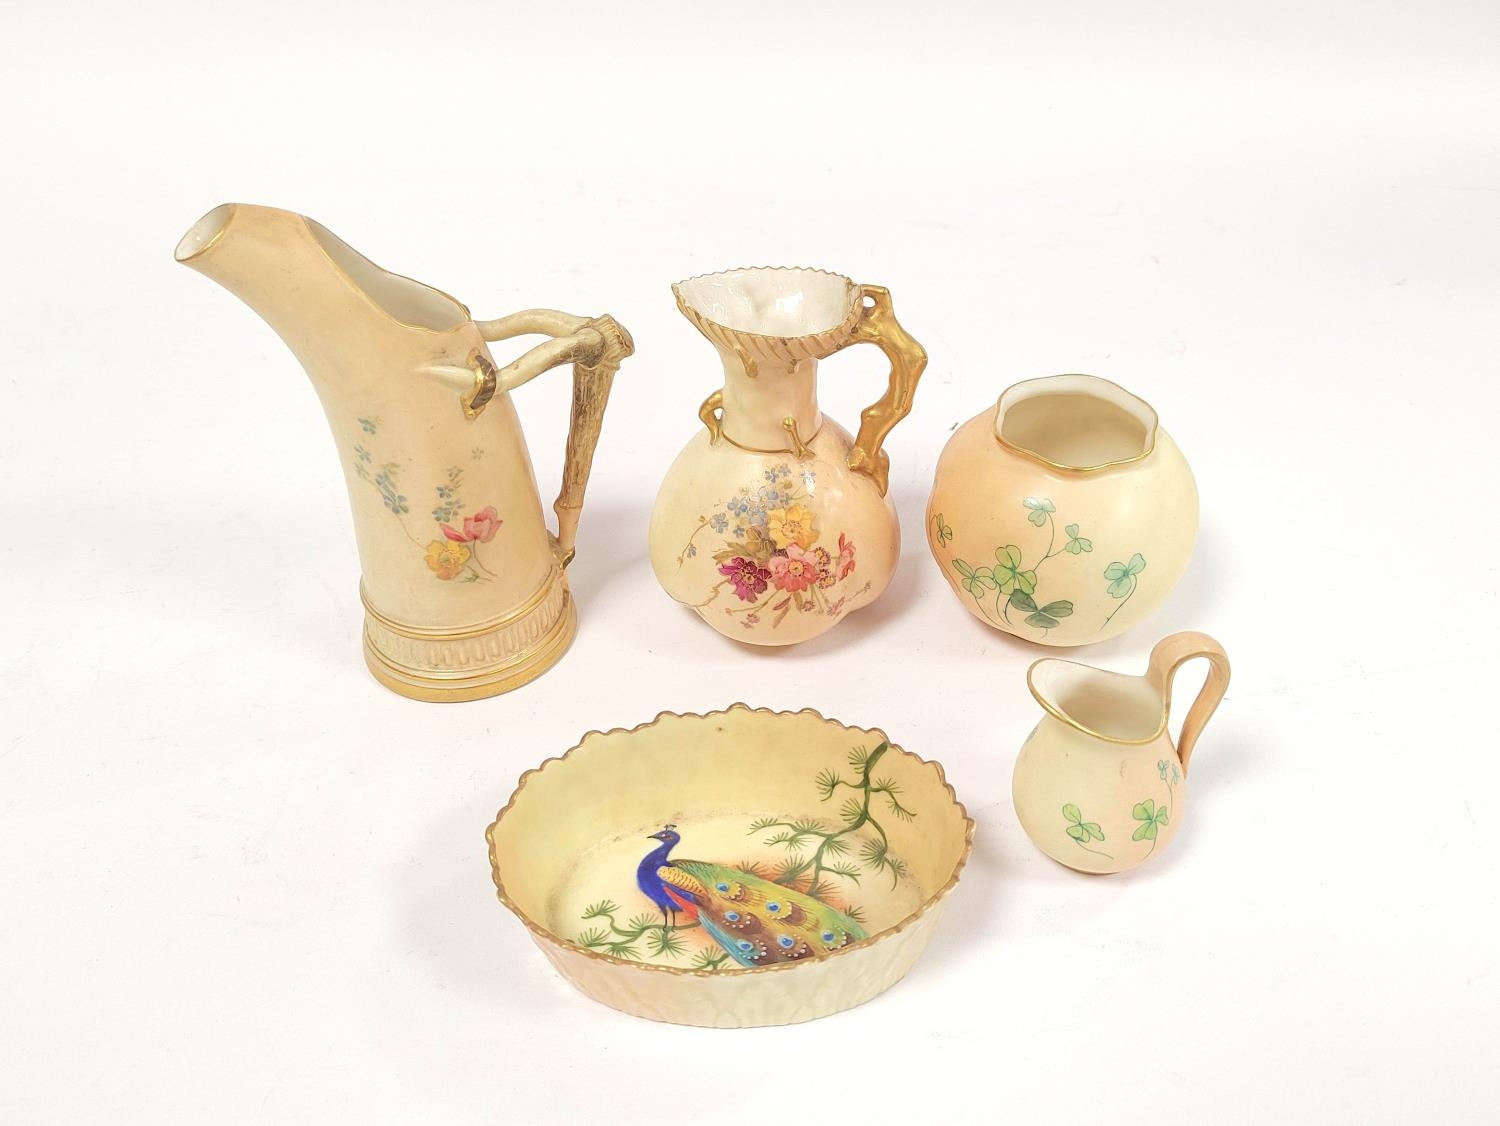 Group of Royal Worcester porcelain, circa early 20th century,to include blush ivory jug decorated